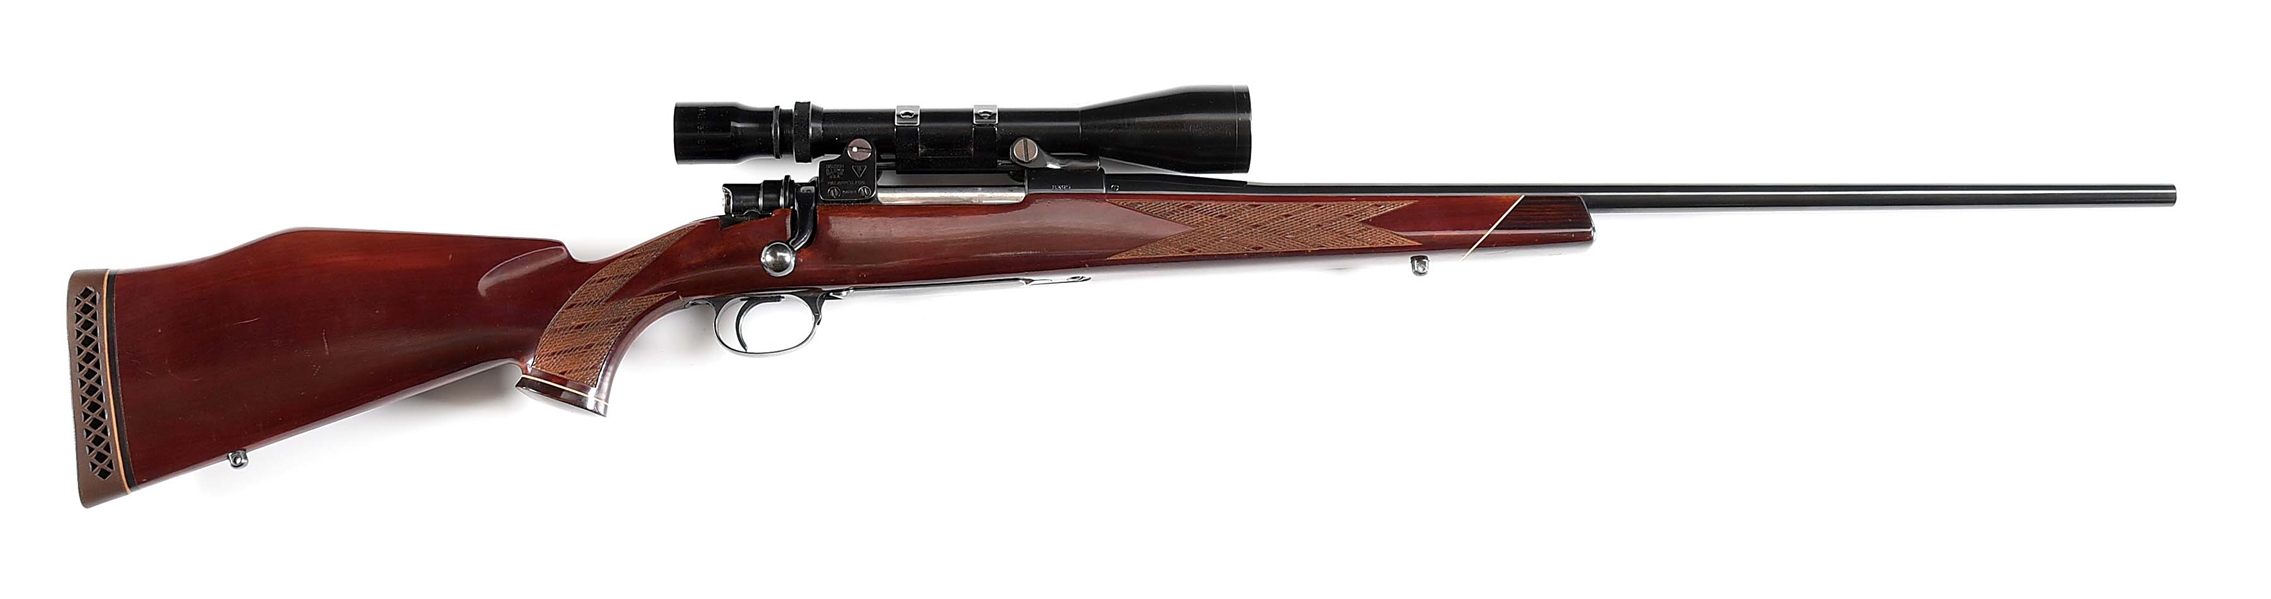 (M) WEATHERBY SOUTHGATE BOLT ACTION RIFLE IN .270 WETHERBY MAGNUM.